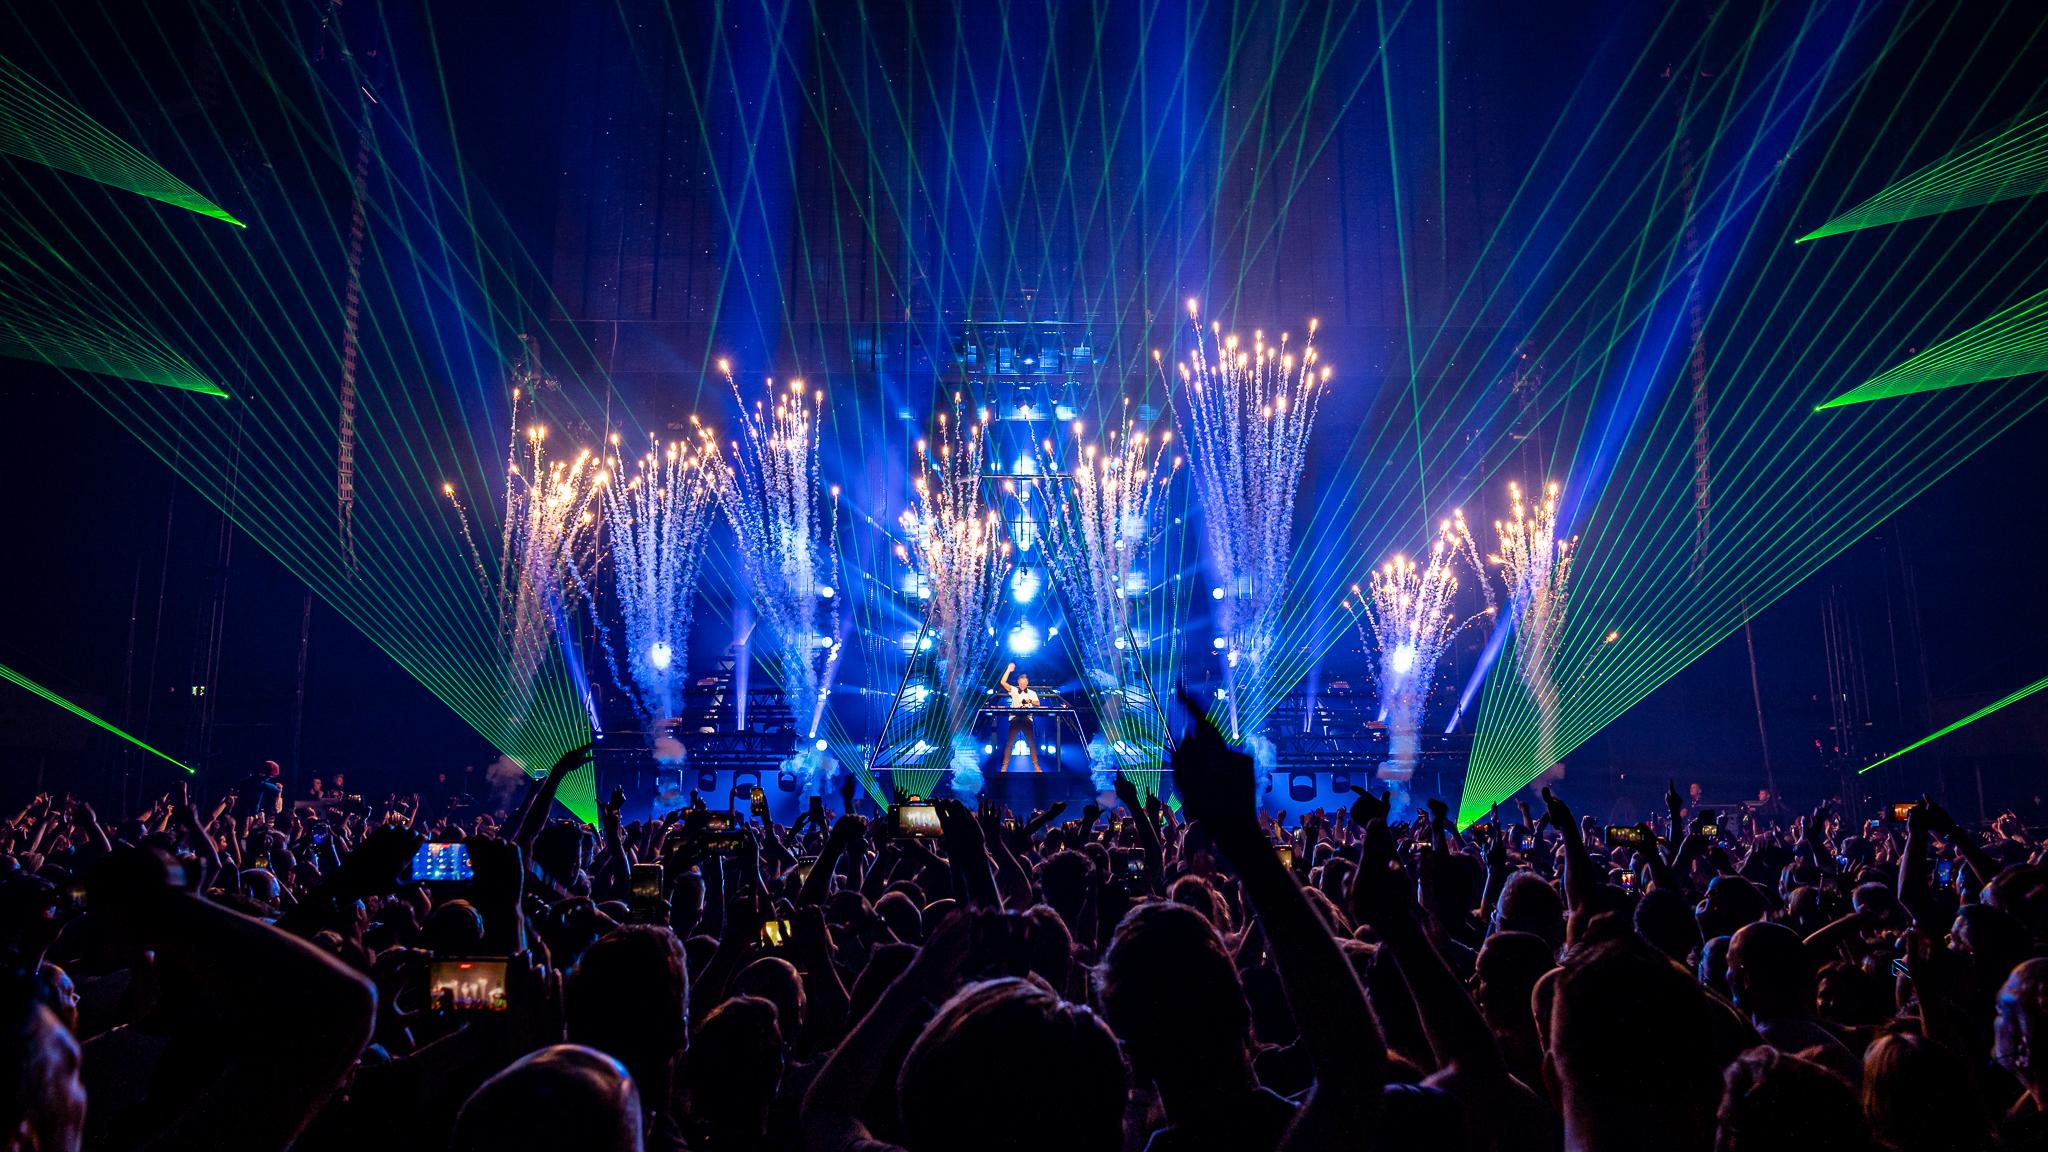 Armin van Buuren fans with their hands in the air as green and blue lasers soar over their heads 